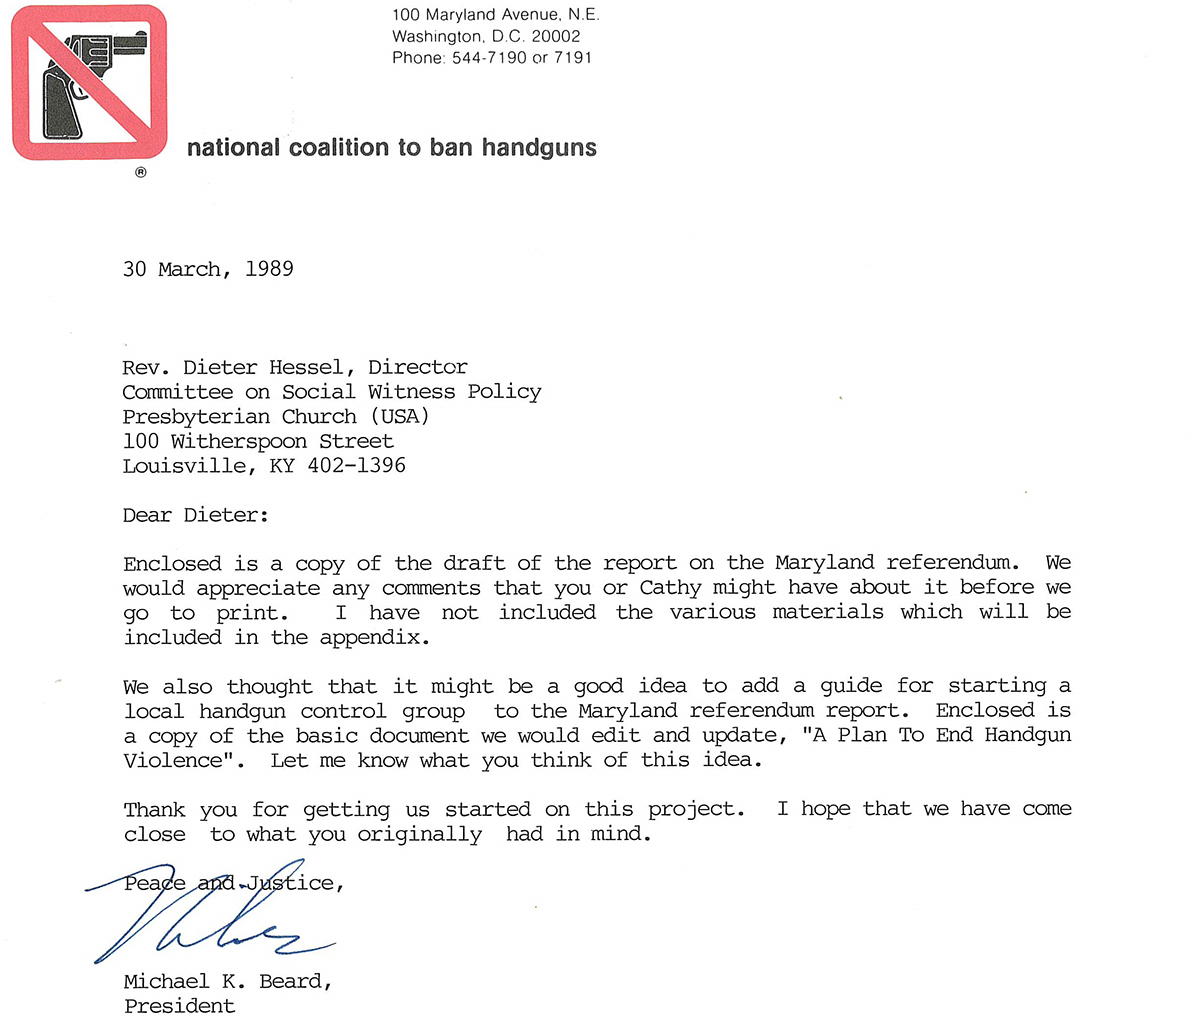 1989 letter from National Coalition to Ban Handguns, via ACSWP records at PHS #20-0929.